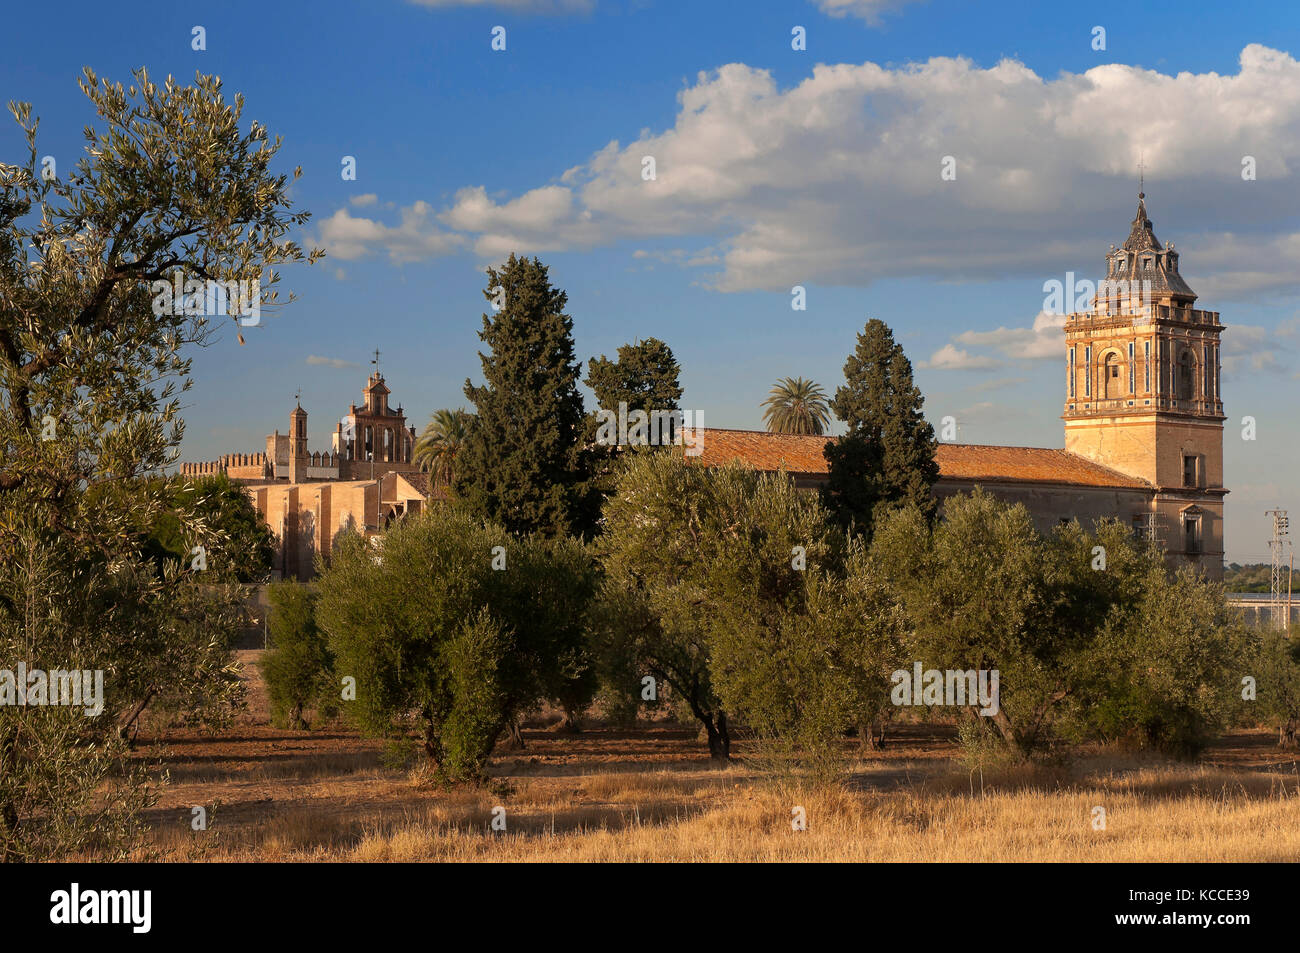 Monastery of San Isidoro del Campo - founded in 1301, Santiponce, Sevilla province, Region of Andalusia, Spain, Europe Stock Photo